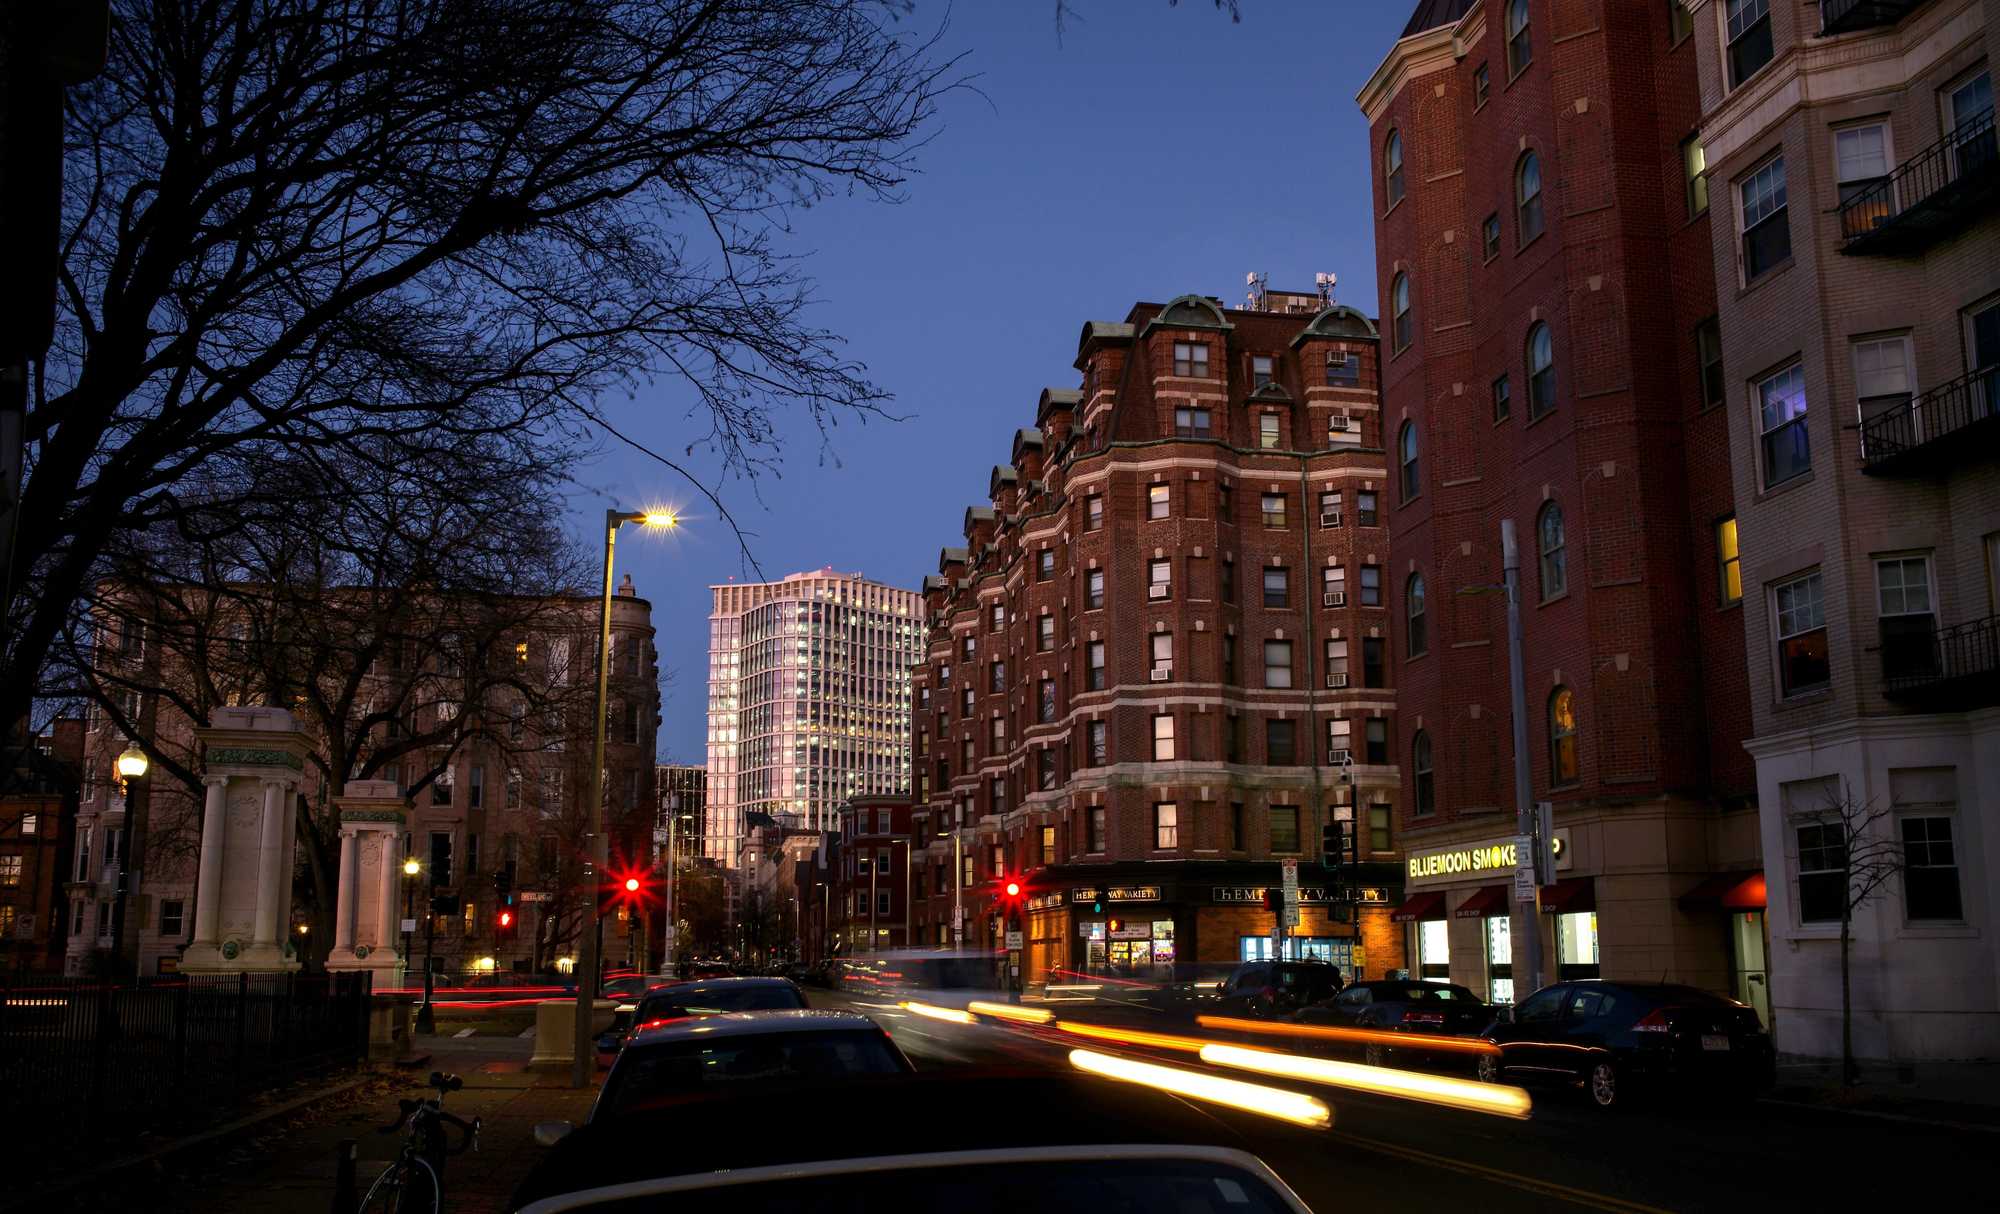 The stately brick Parkside building (center), located in the heart of the Fenway neighborhood, now has an assessed value that is seven times higher than it was when rent control ended.